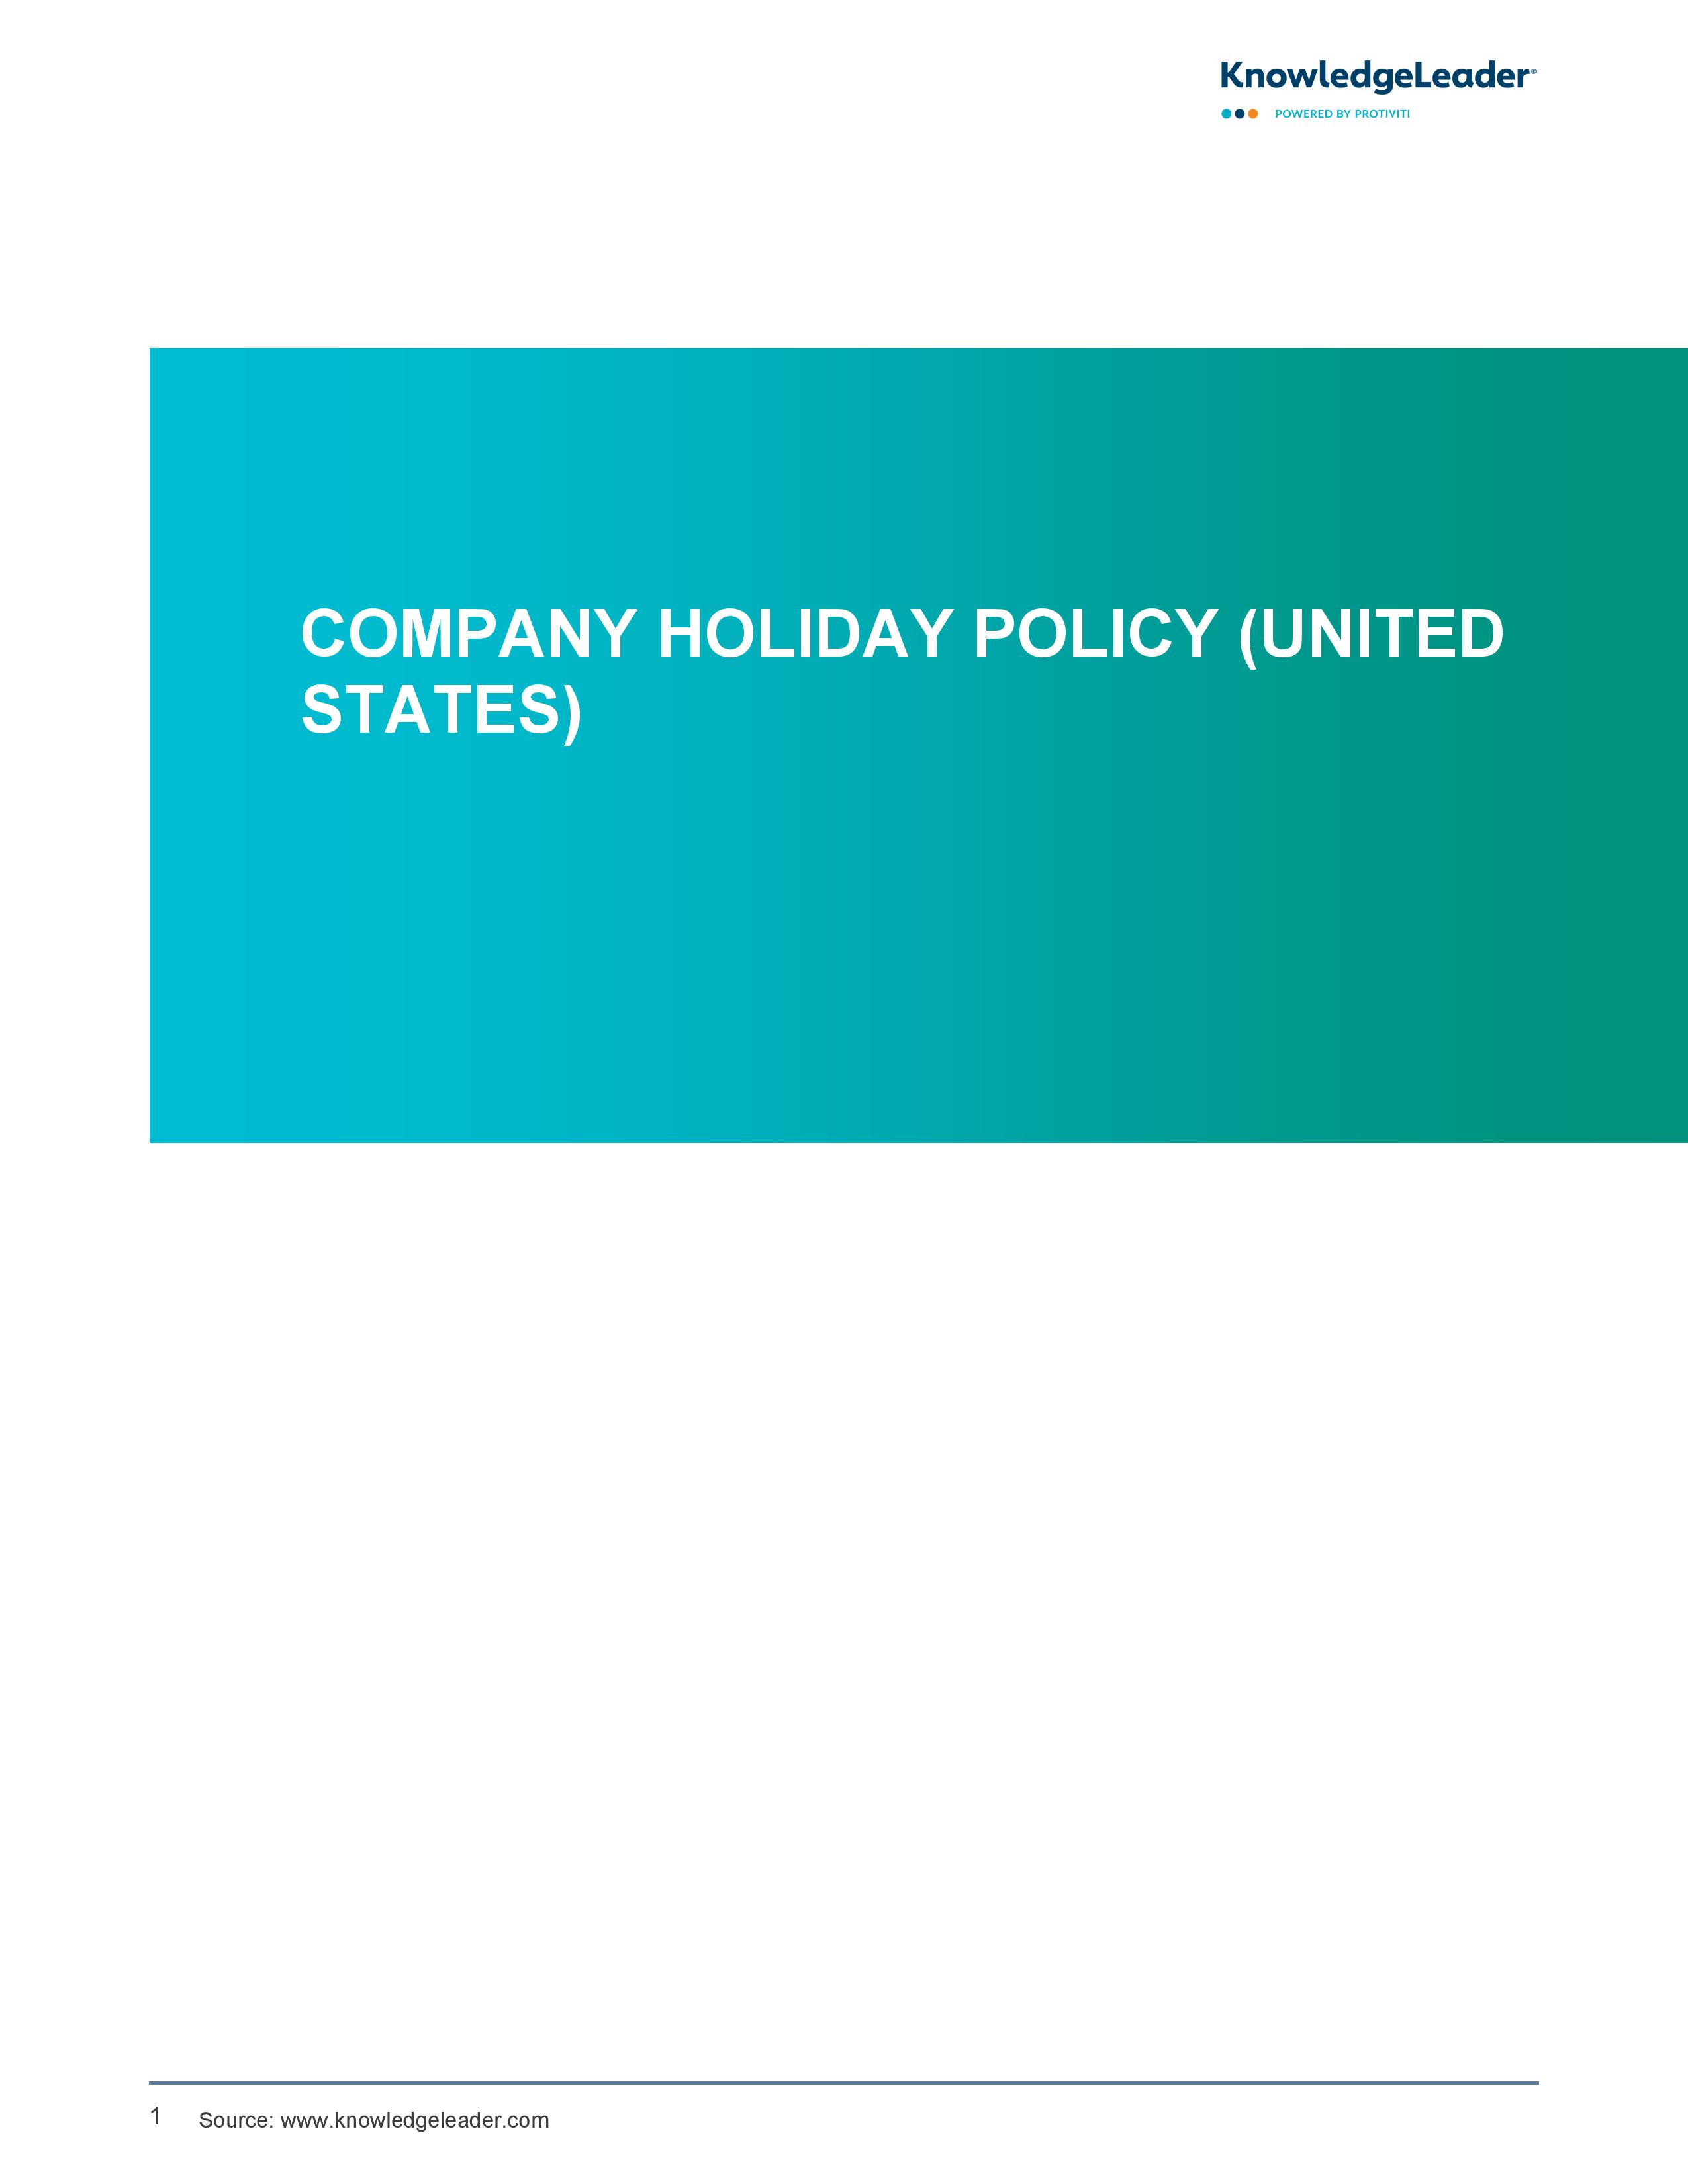 screenshot of the first page of Company Holiday Policy (United States)